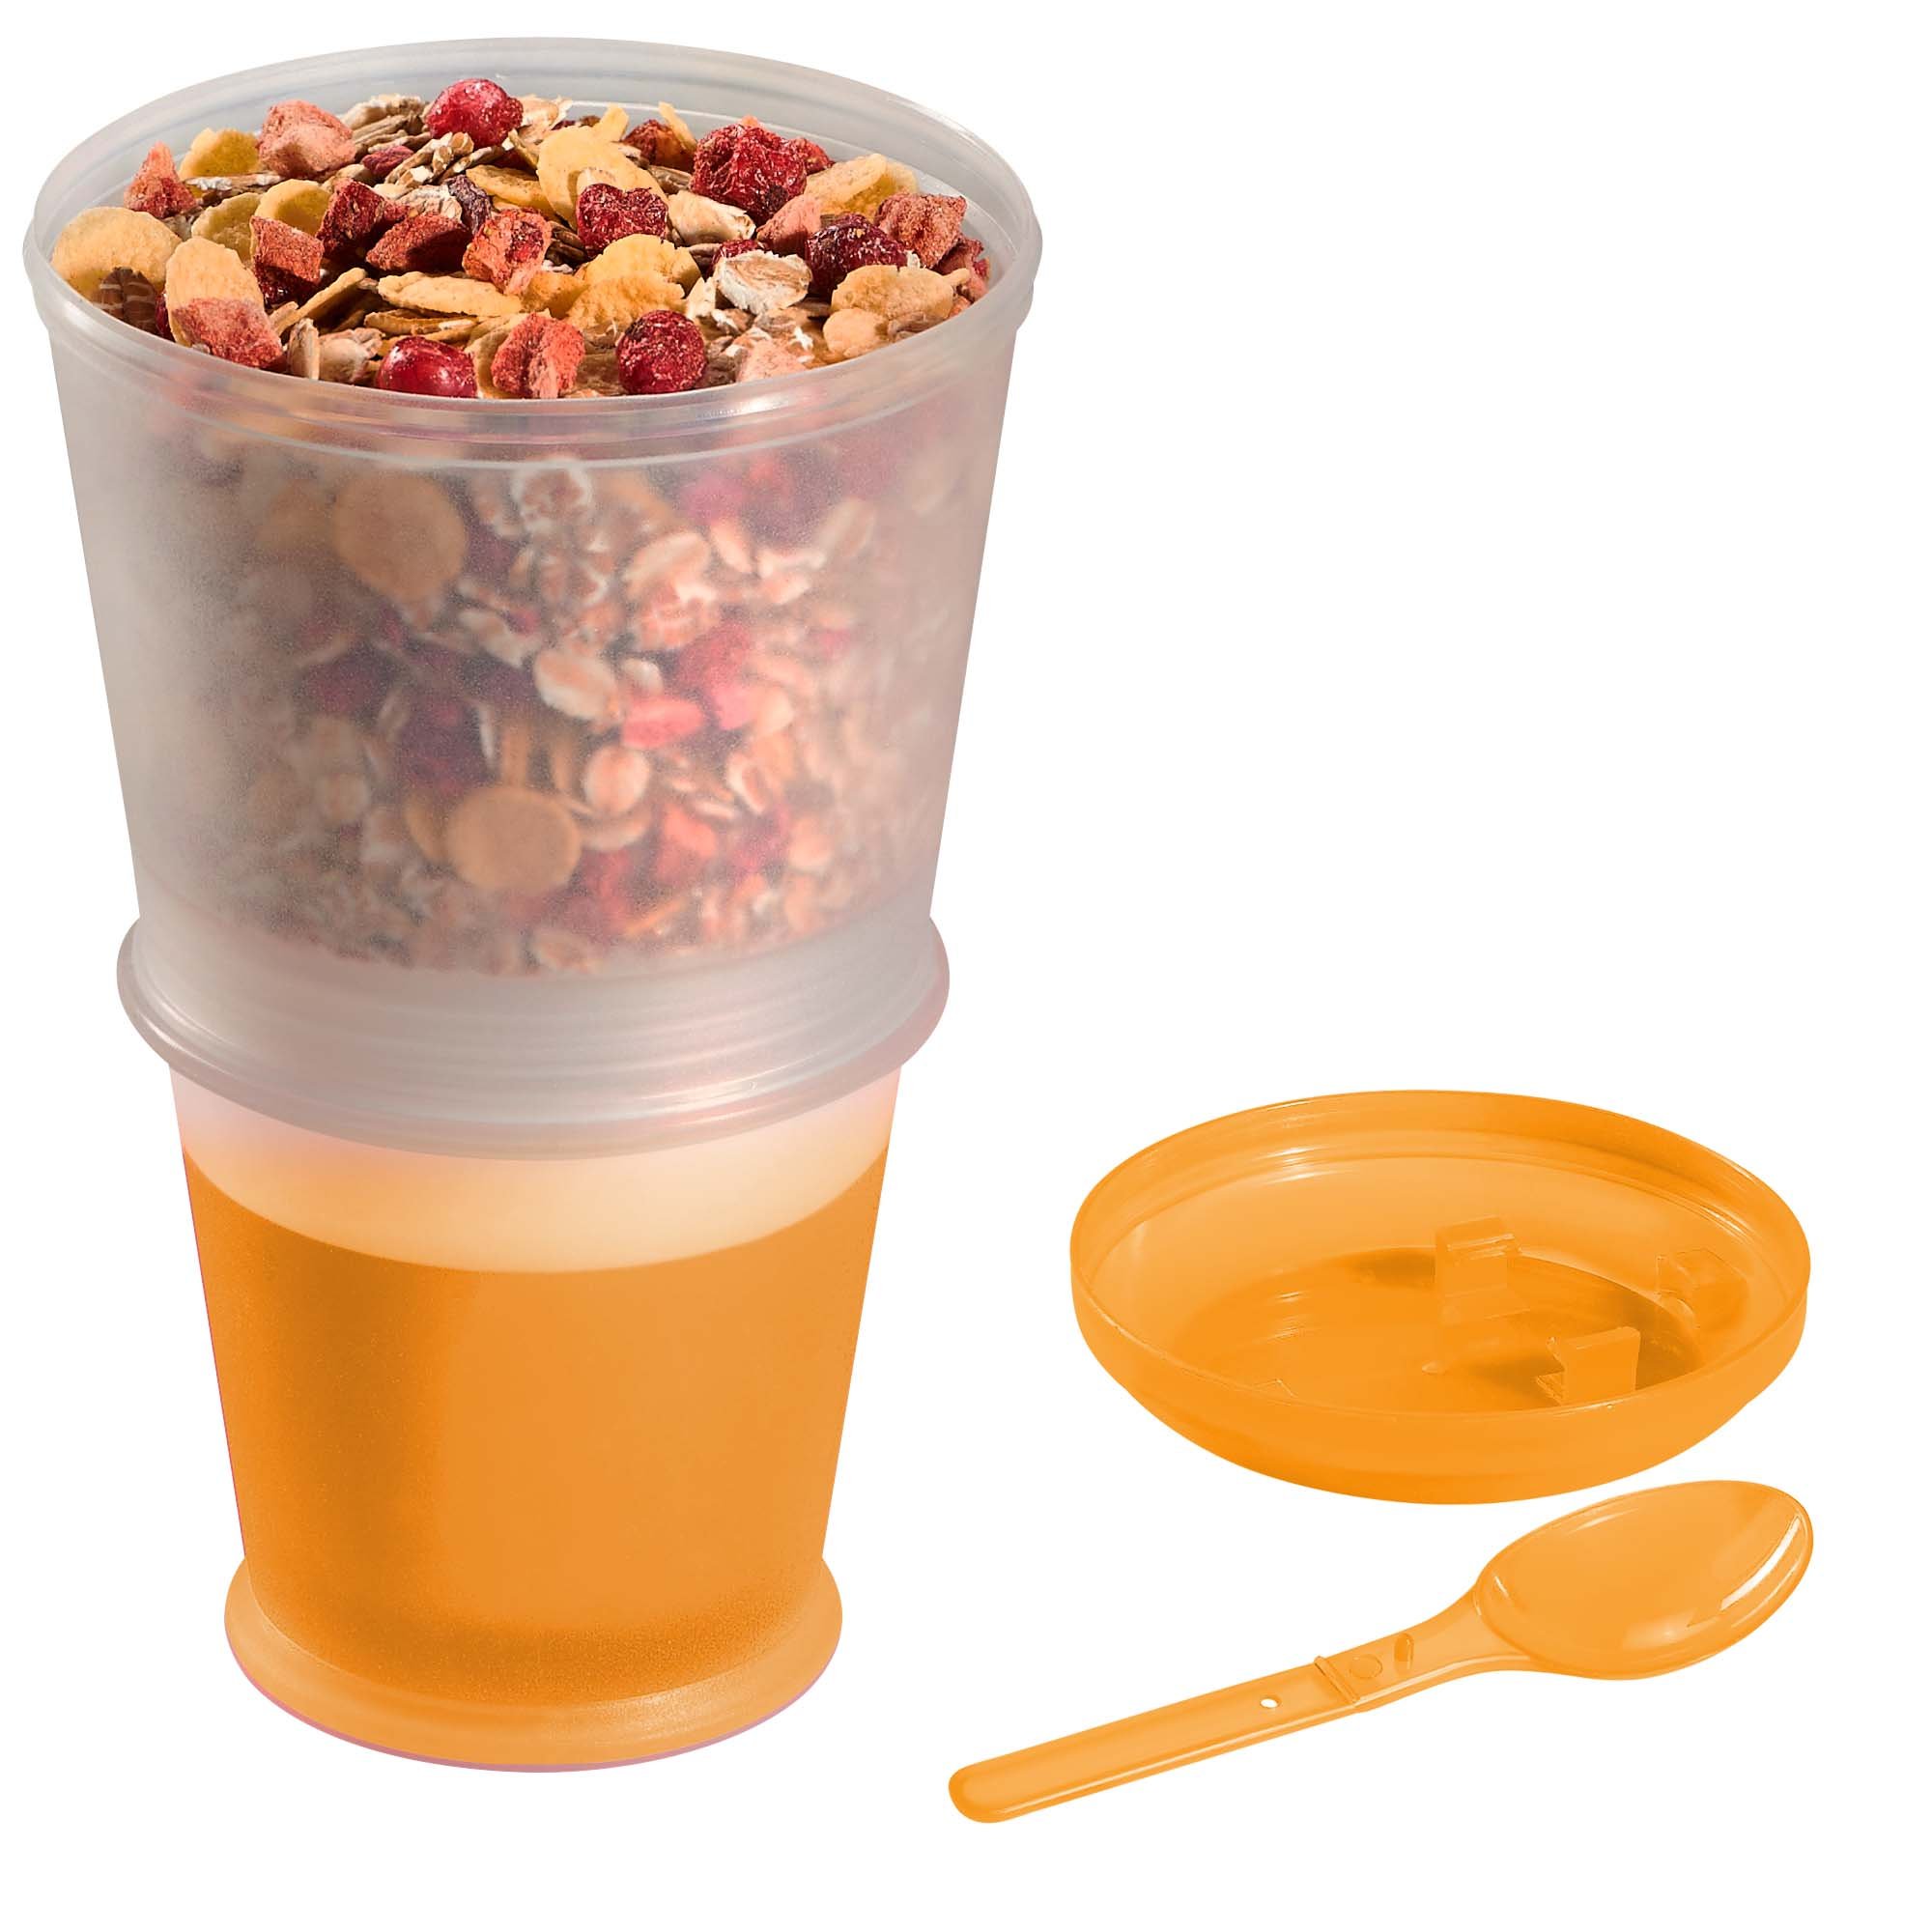 BELLA CUCINA Portable Cereal Cup, Cooling Compartment, Spoon | orange